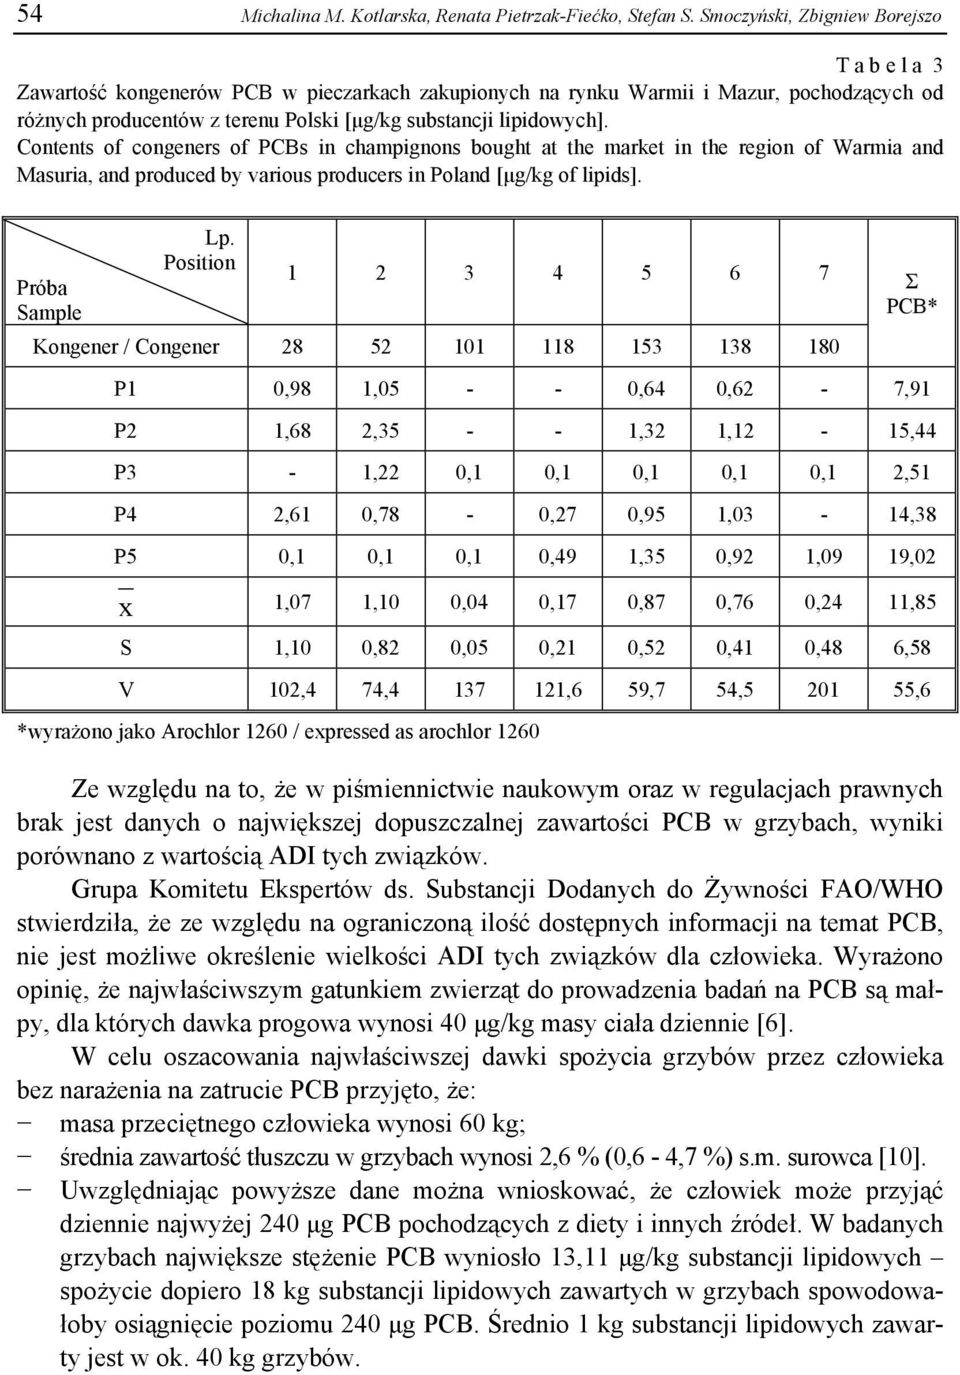 lipidowych]. Contents of congeners of PCBs in champignons bought at the market in the region of Warmia and Masuria, and produced by various producers in Poland [μg/kg of lipids]. Próba Sample Lp.